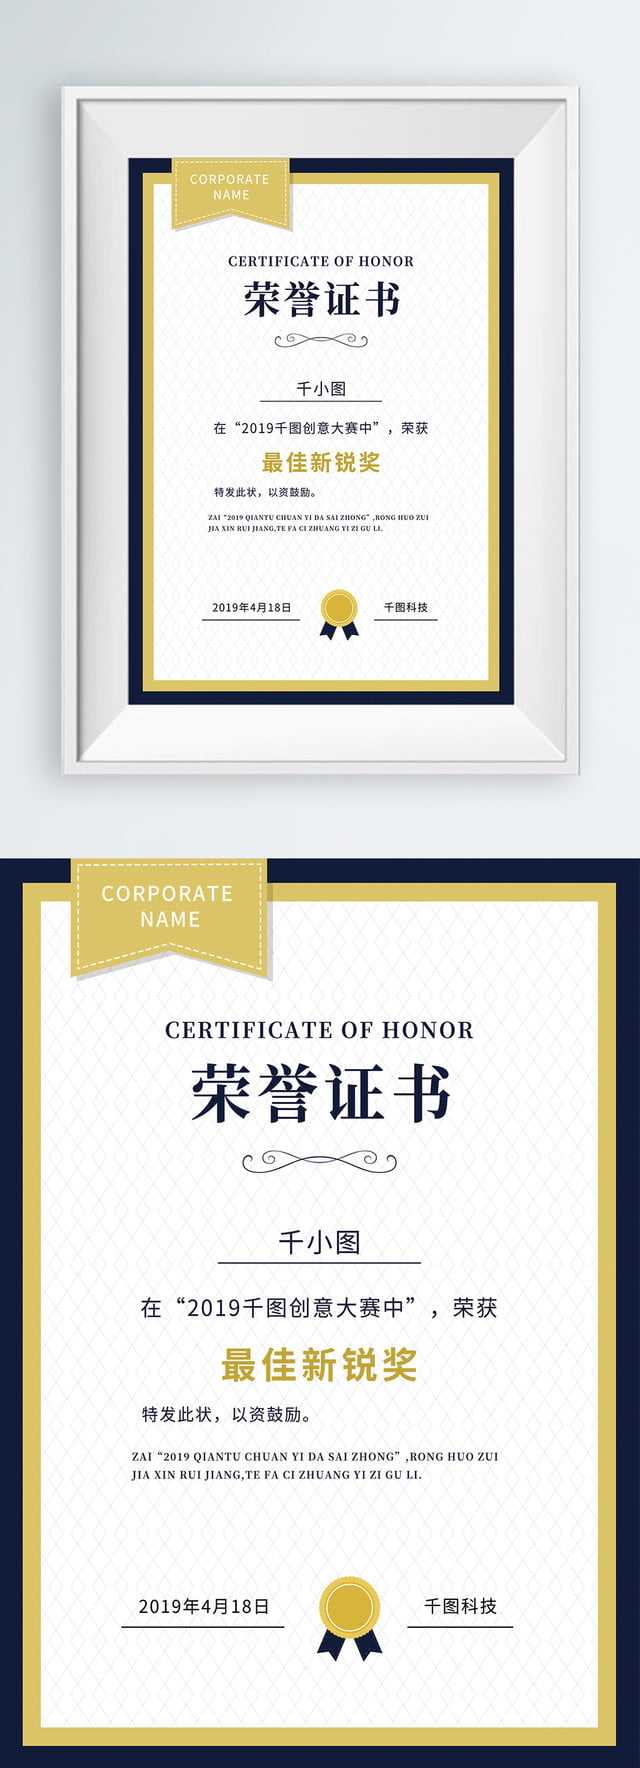 Certificate Authorization Certificate Certificate Of Honor With Certificate Of License Template